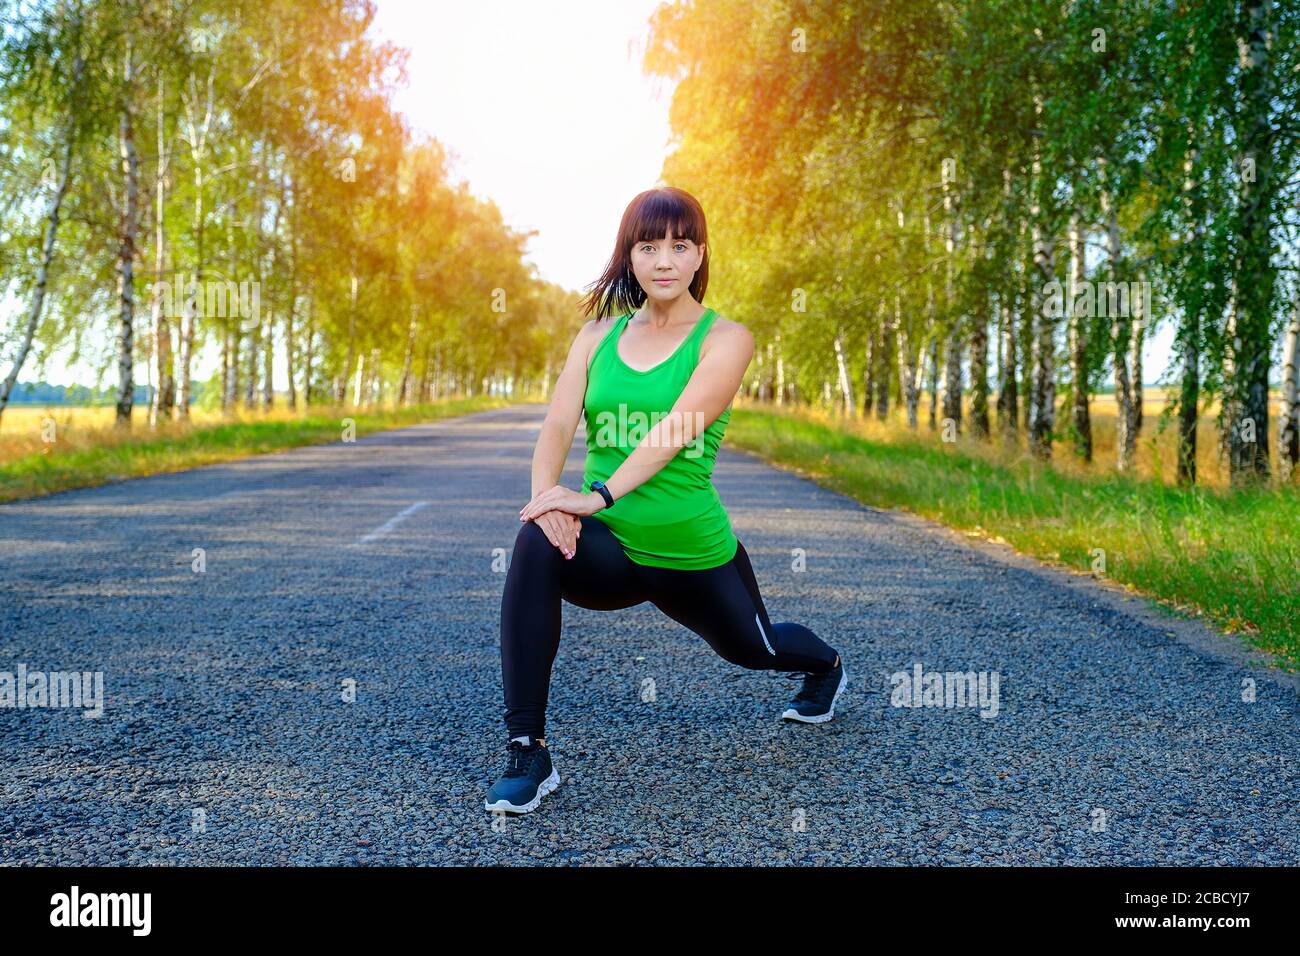 Young woman stretching legs before jogging on asphalt road  Stock Photo